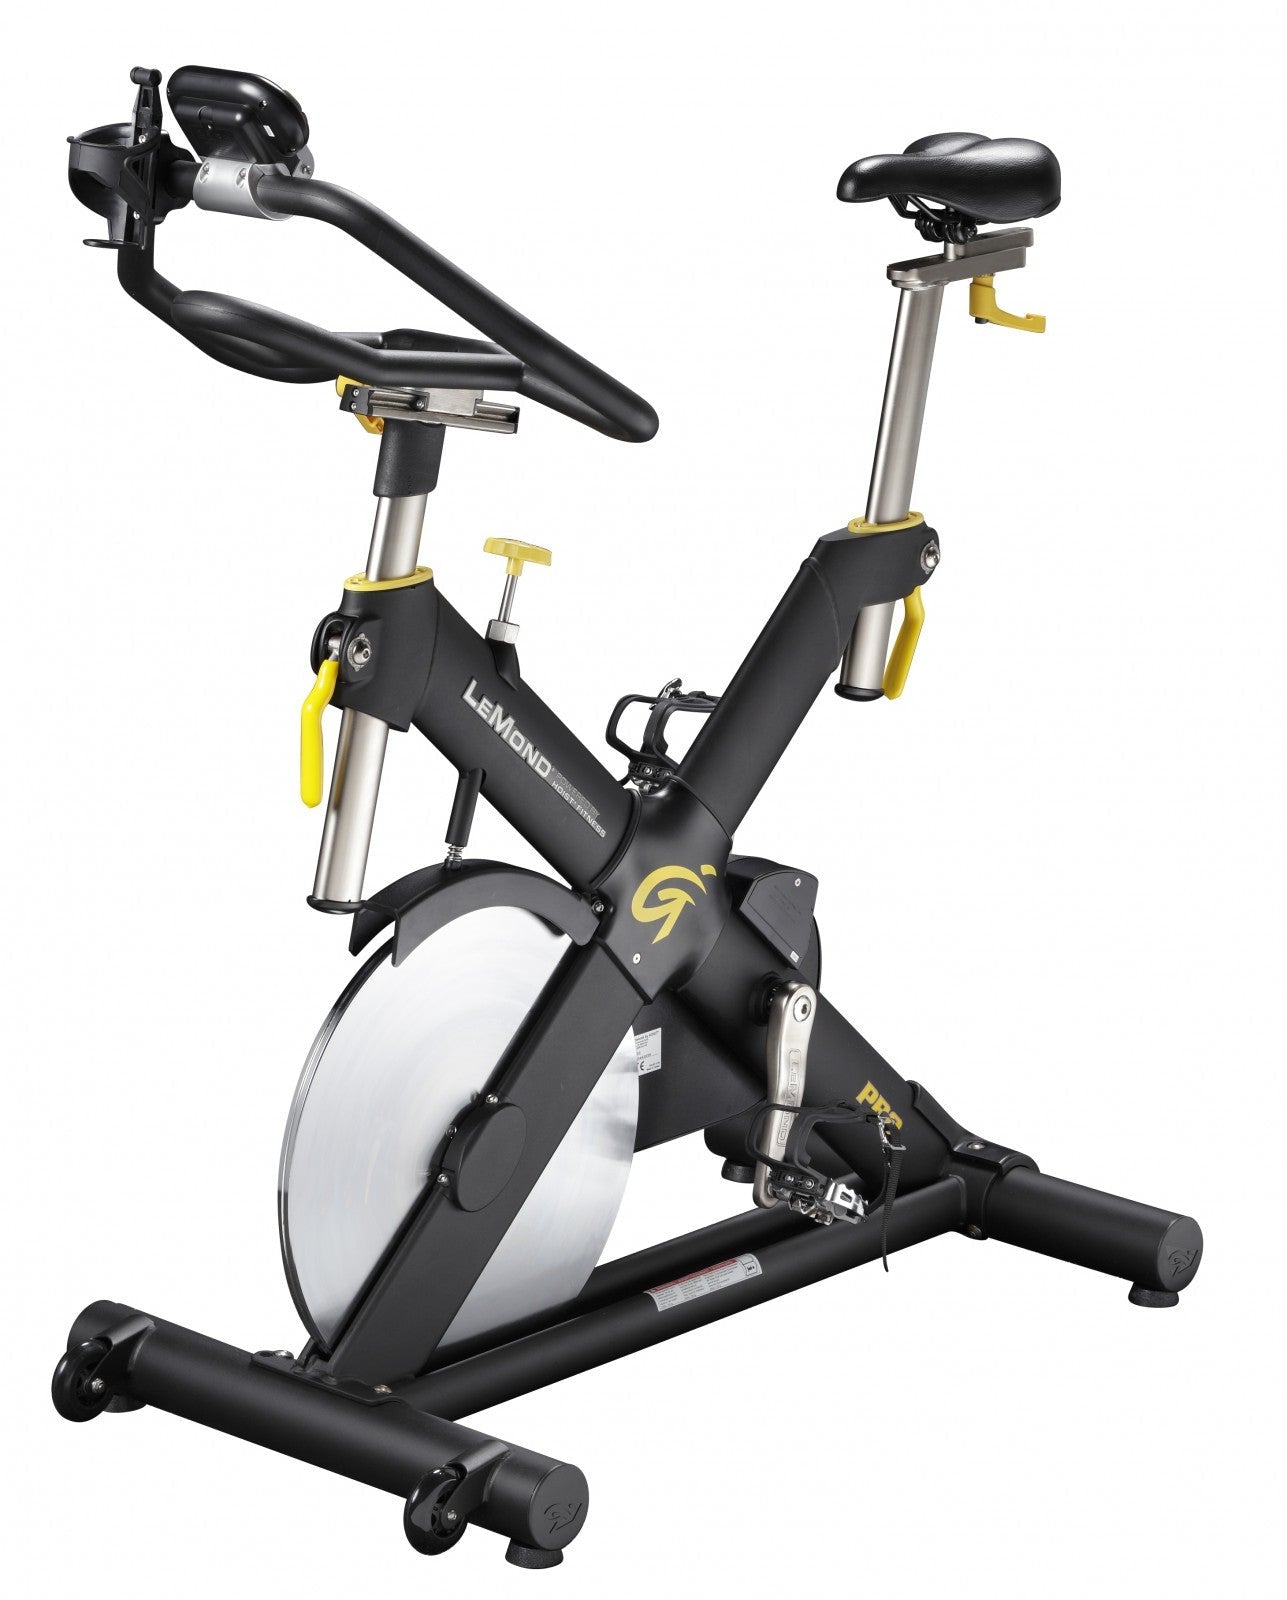 Hoist Fitness Revmaster Pro Cycling Bike full view | Fitness Experience